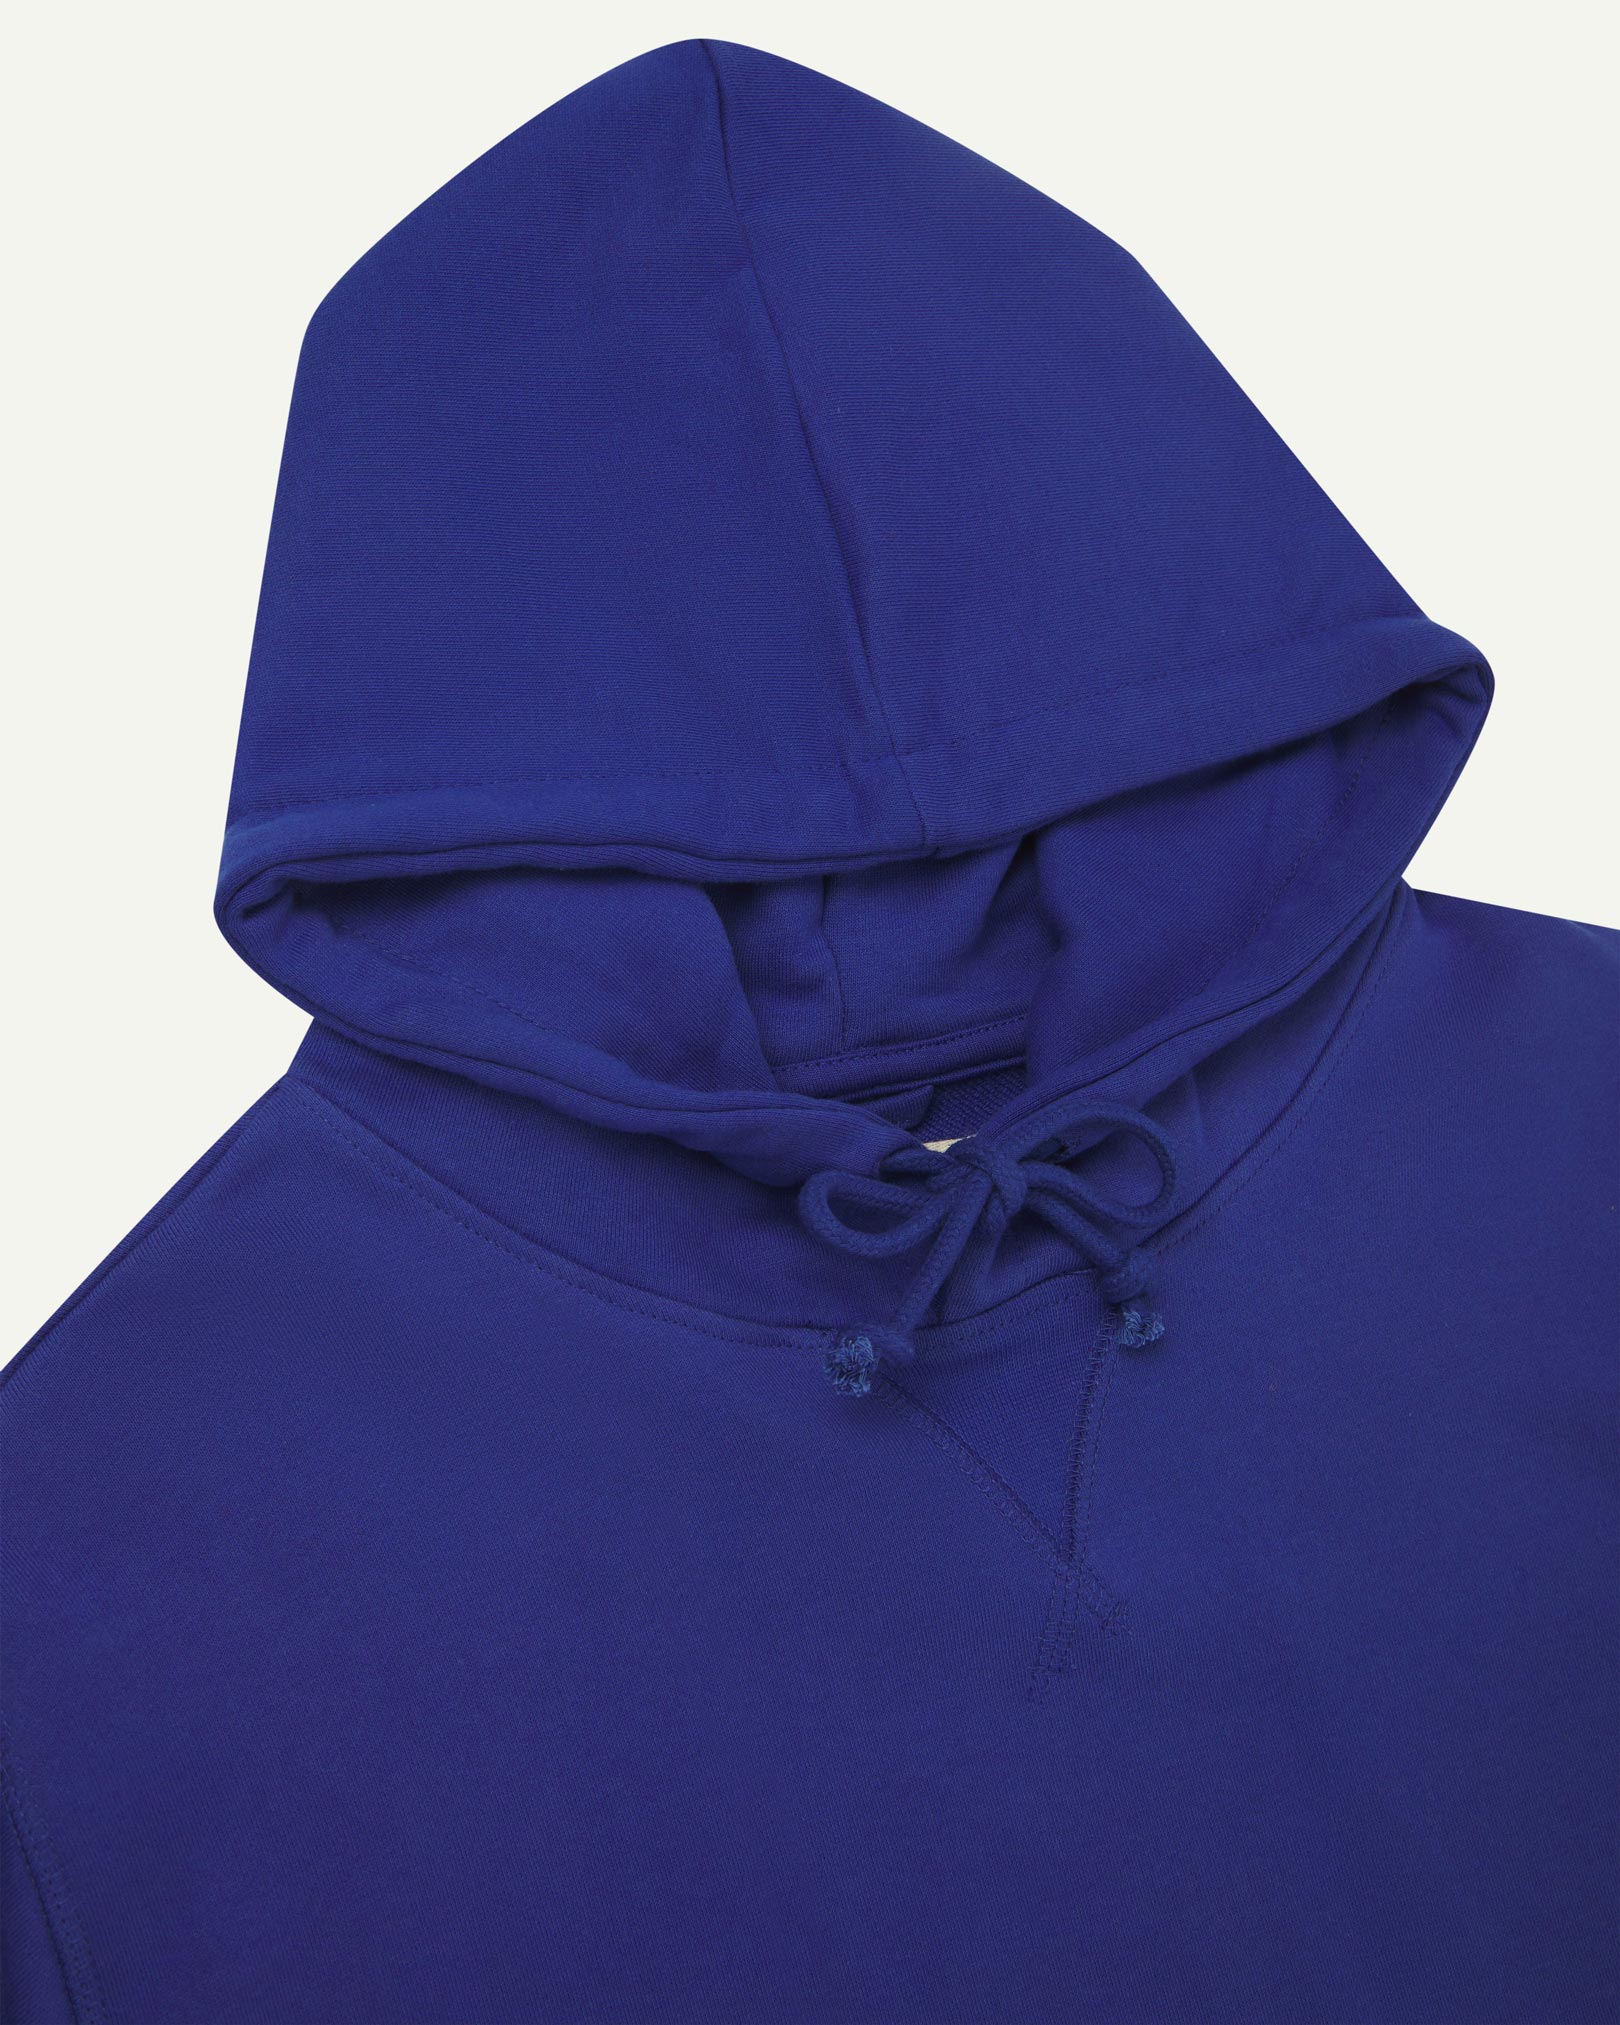 Front close-up view of Uskees 7004 'ultra blue' hoodie showing hood tie detail at neck and decorative V pattern.